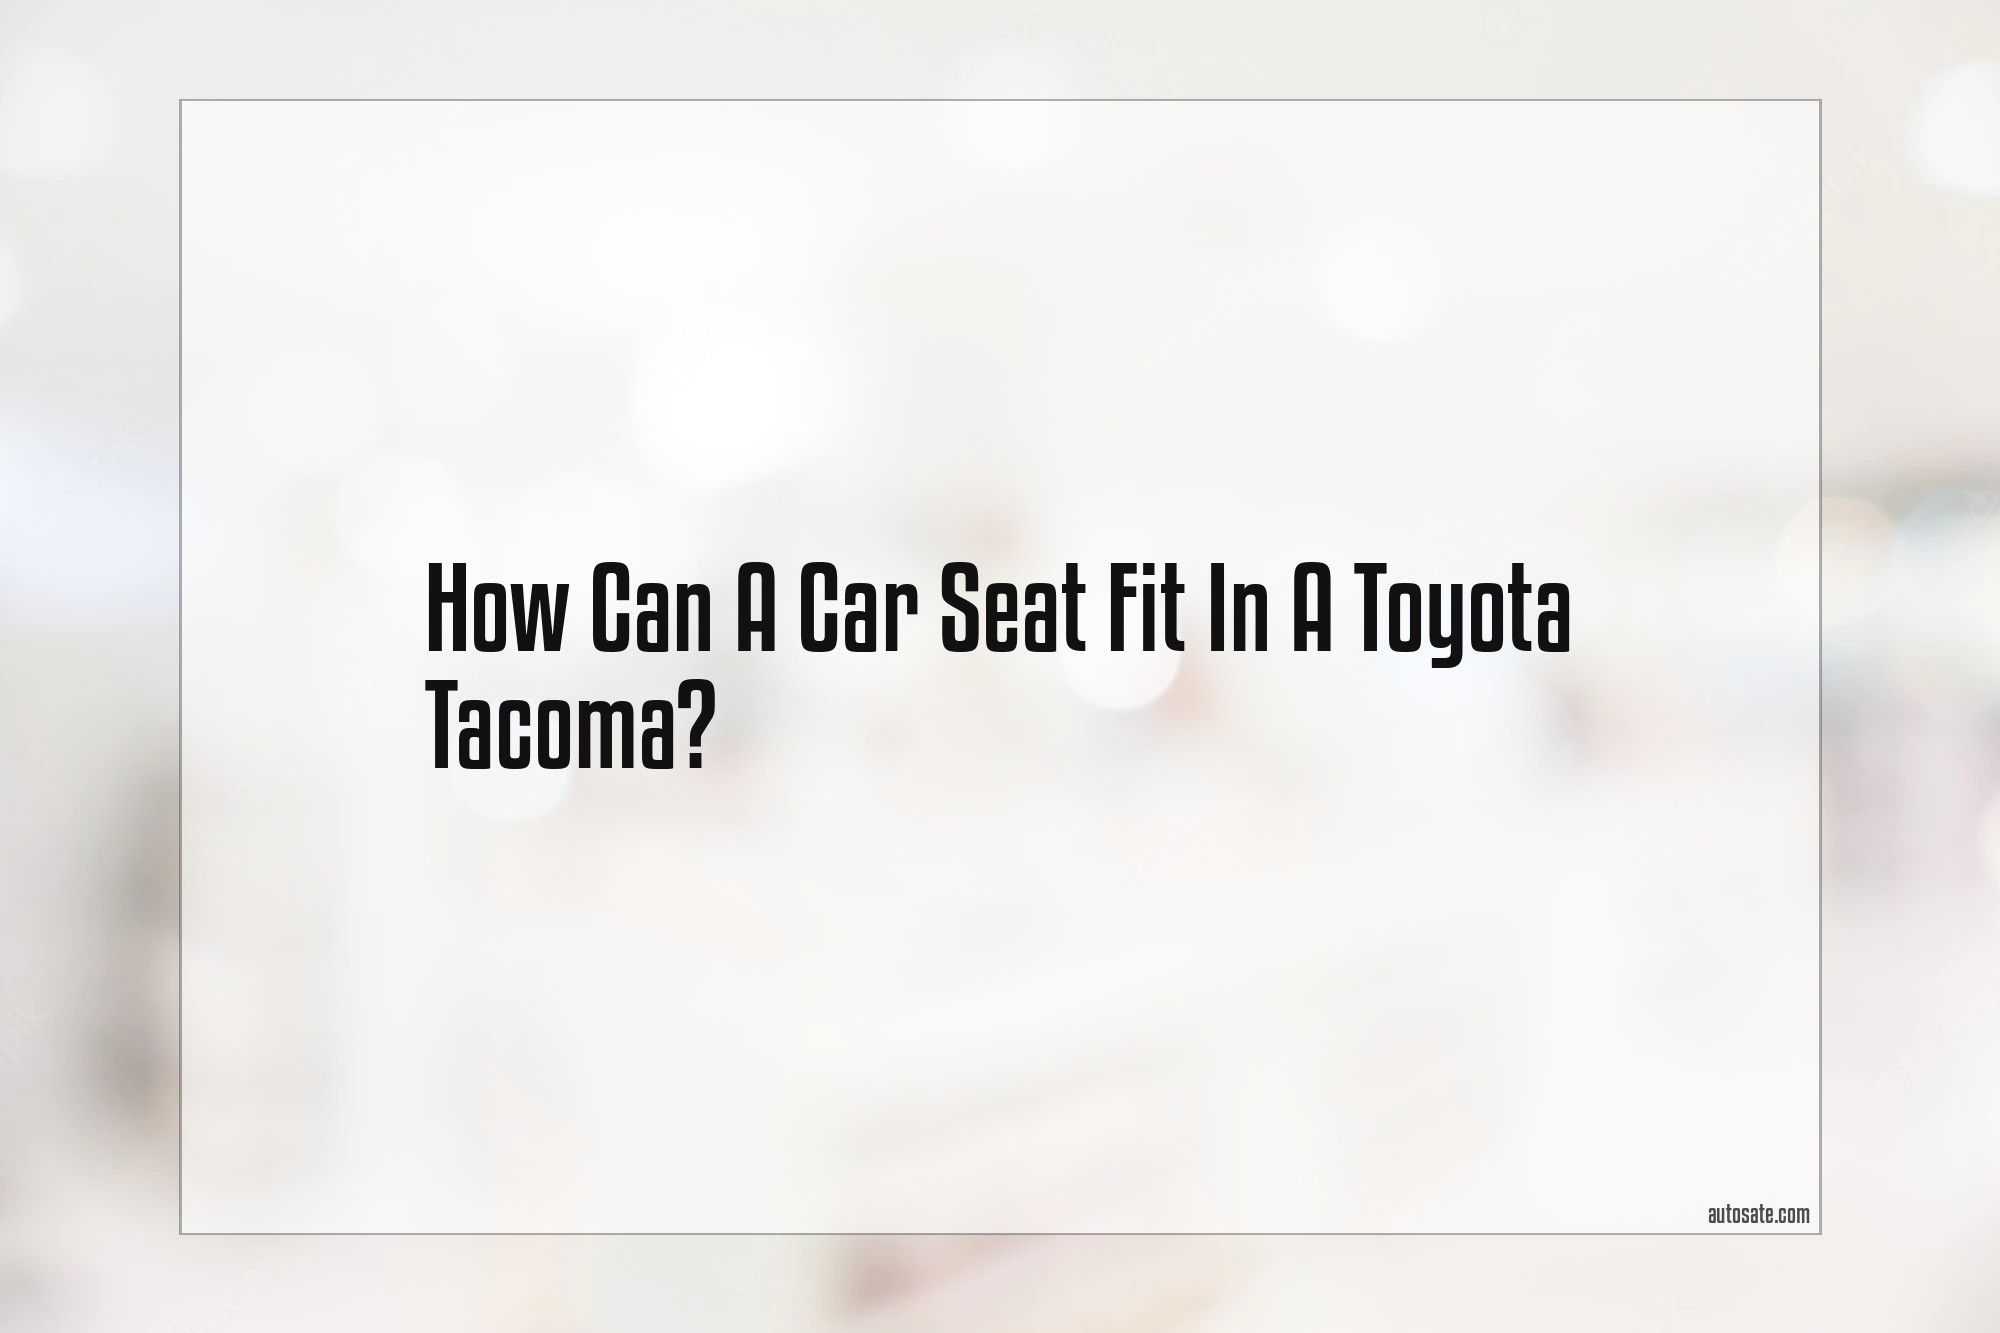 Can A Car Seat Fit In A Toyota Tacoma